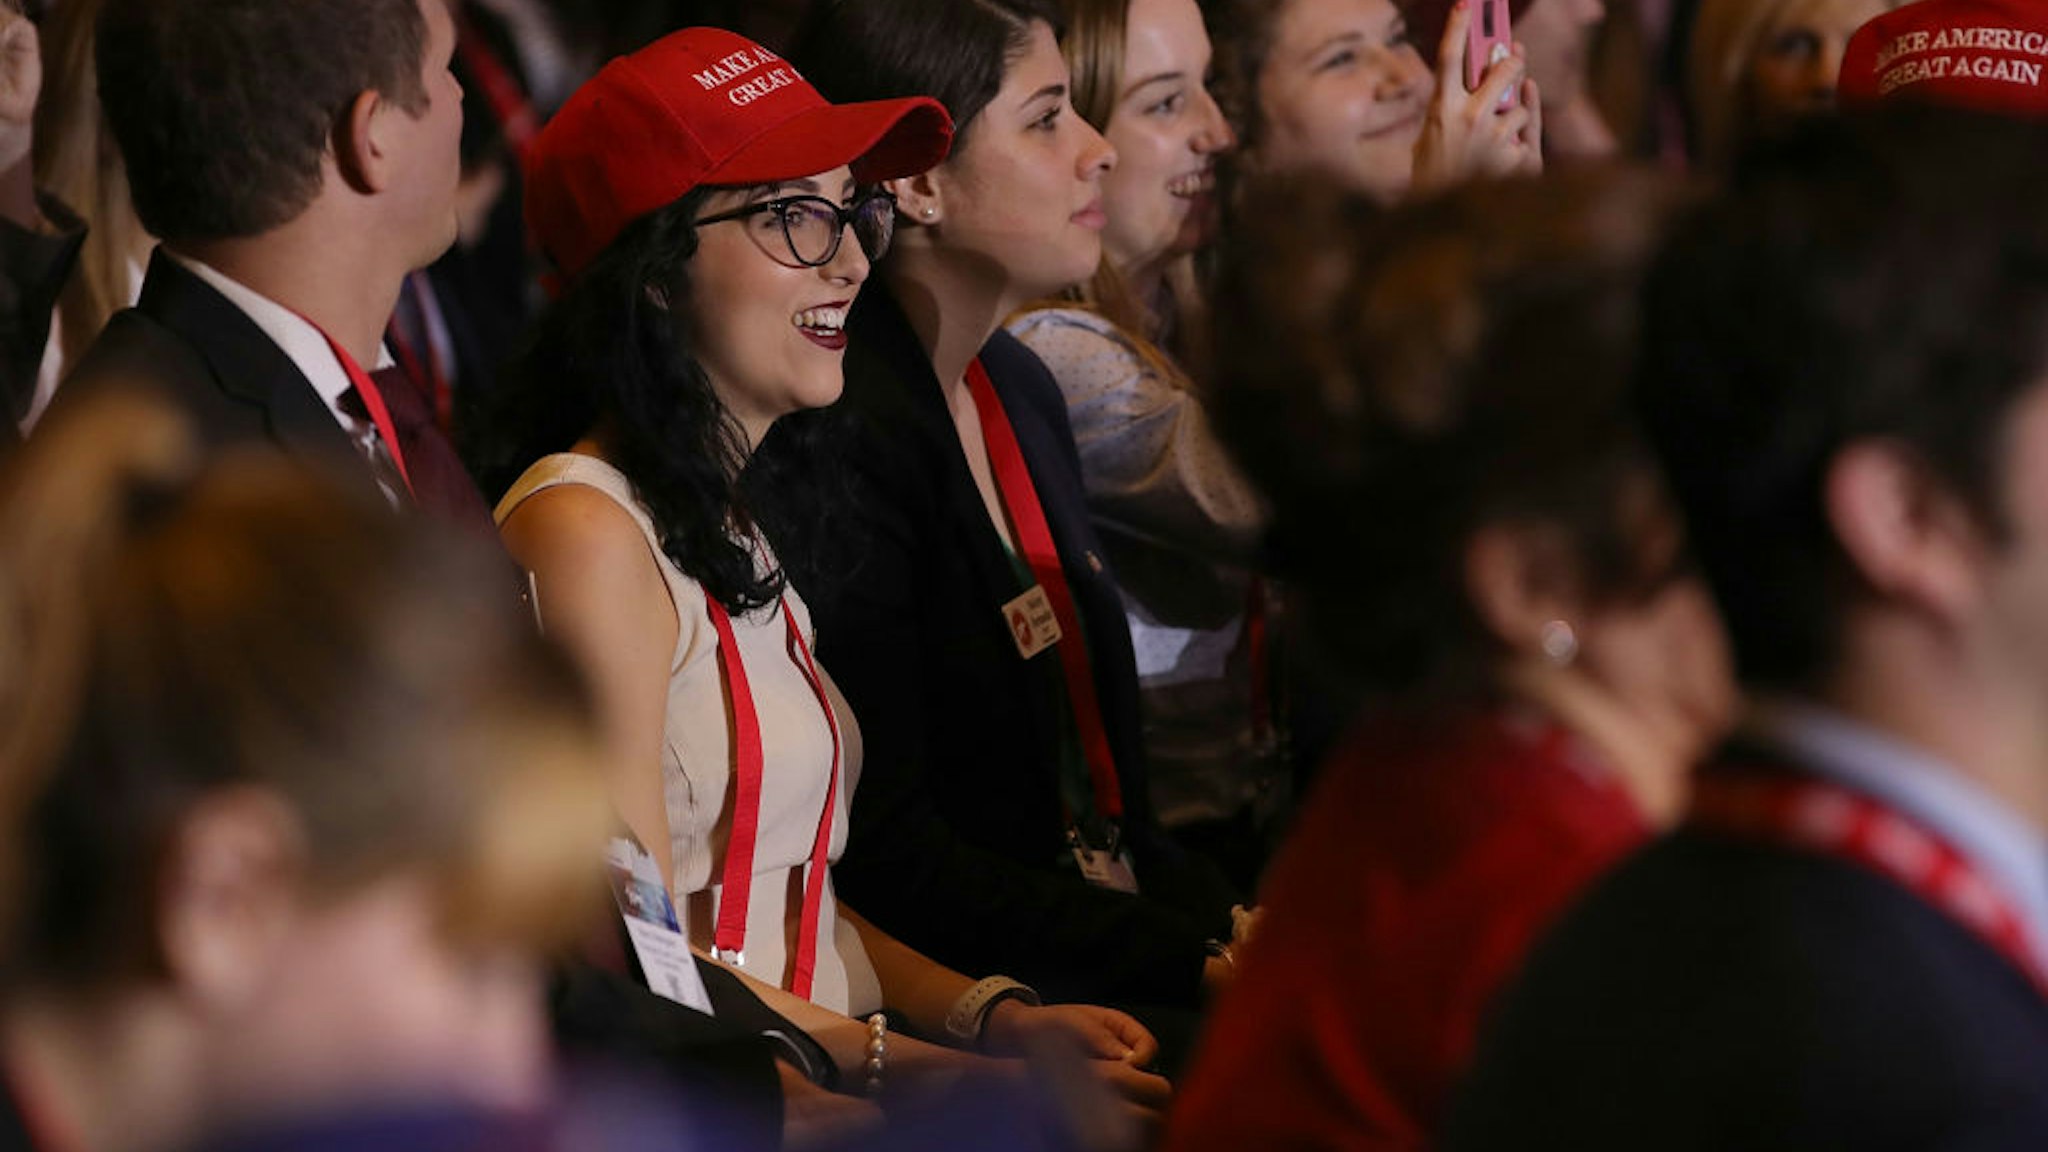 Young people listen to U.S. President Donald Trump as he addresses the Conservative Political Action Conference at the Gaylord National Resort and Convention Center February 23, 2018 in National Harbor, MD.